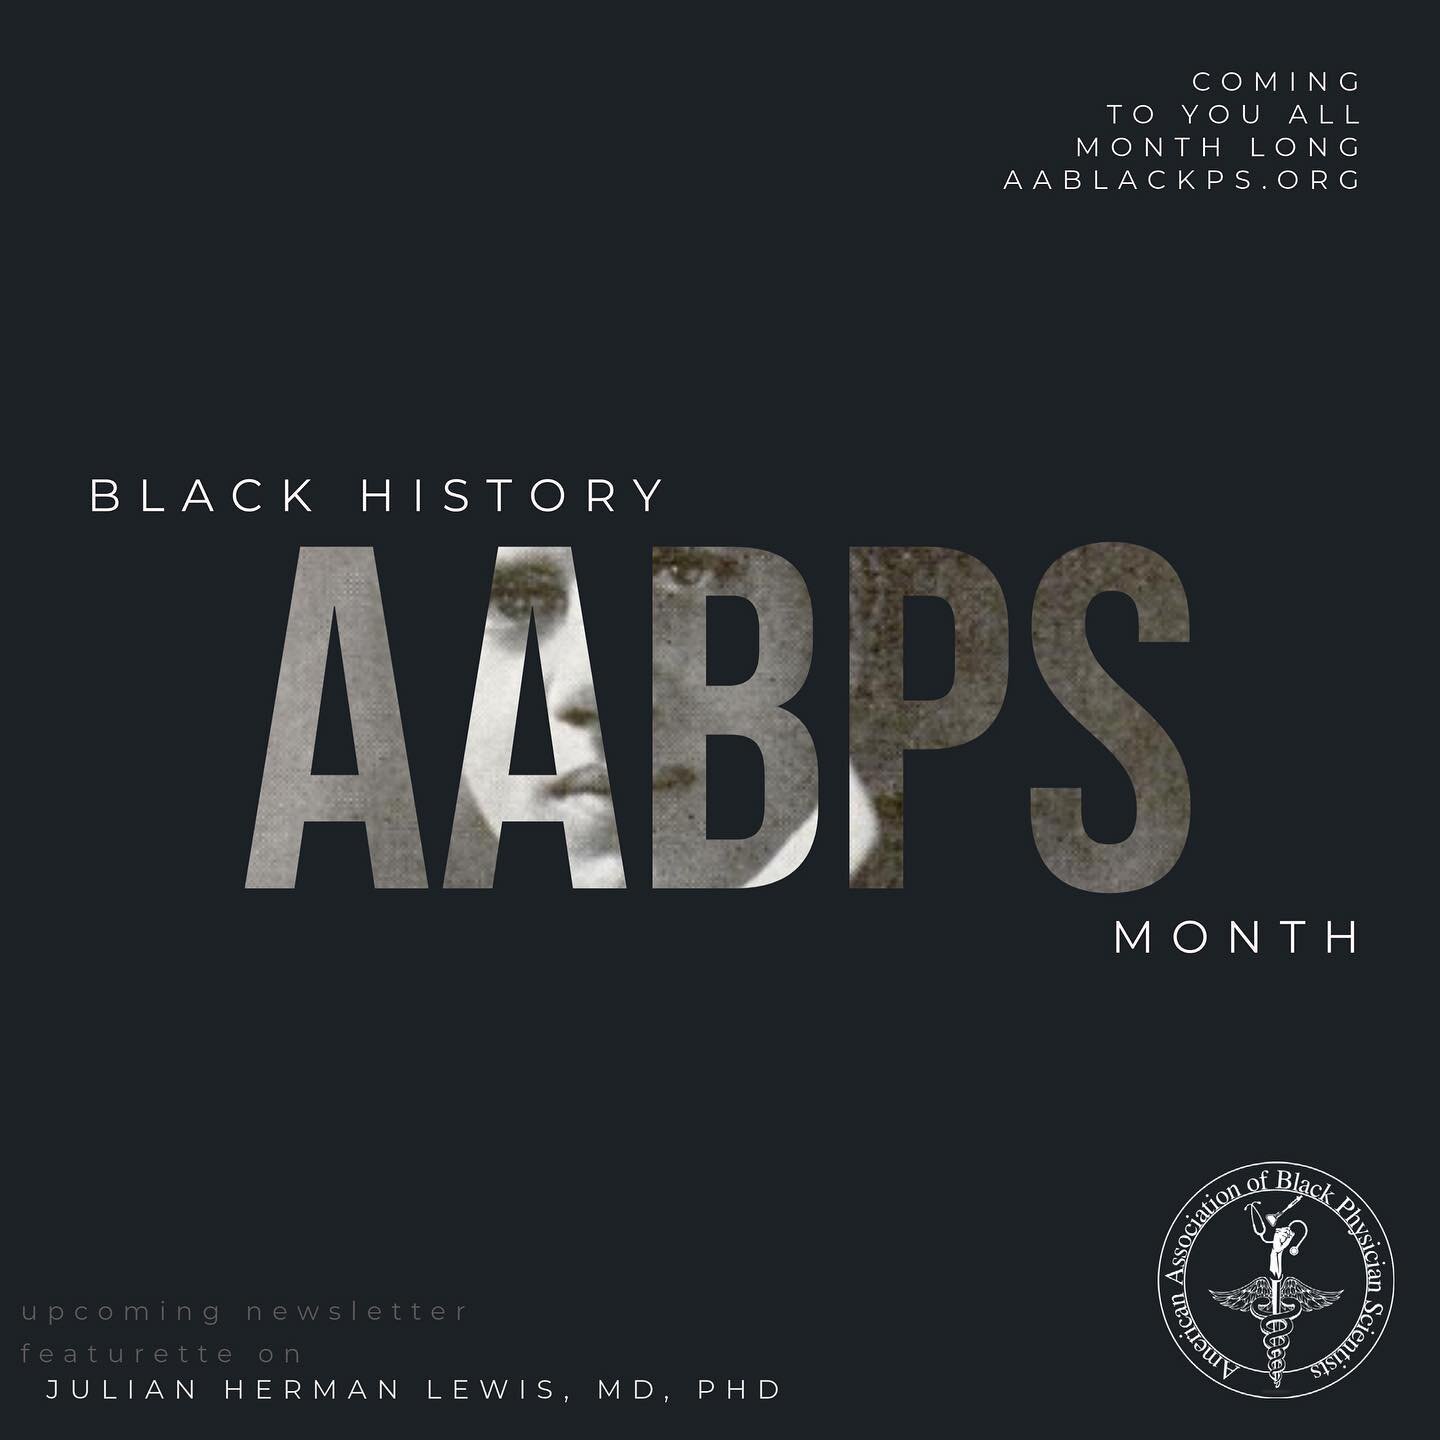 Look out for our first newsletter with highlight features on Dr. Julian Herman, MD, PhD, and our first student member.&nbsp;&nbsp;#Blackminds #BlackHistoryMonth #MedTwitter #mstp #mdphd #aablackps